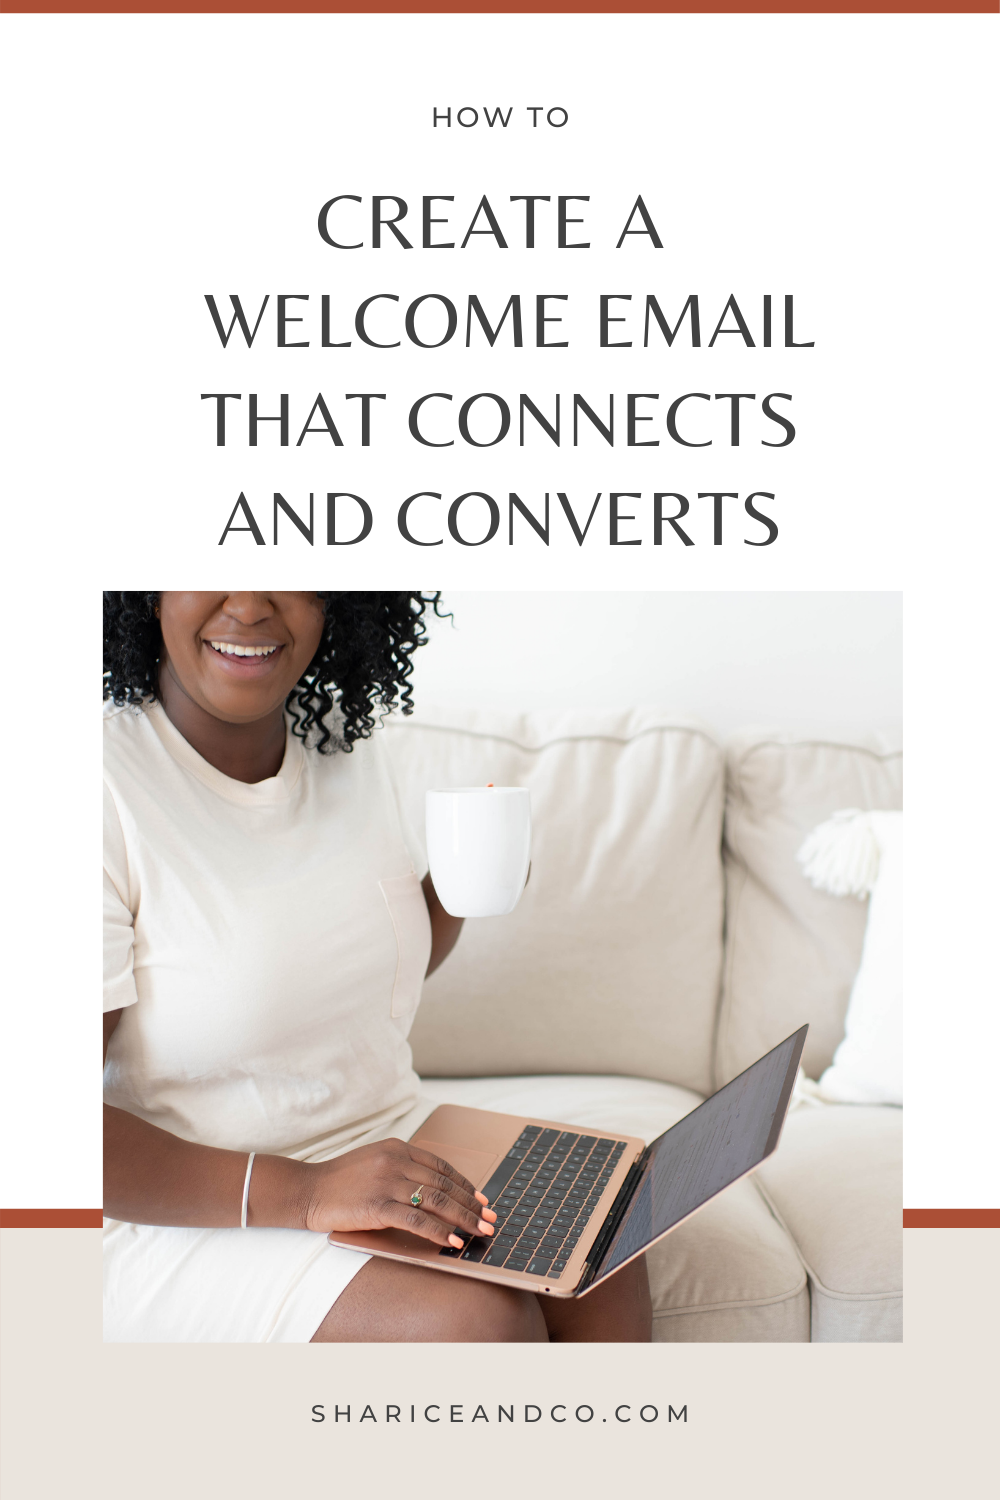 How to Create a Welcome Email that Connects and converts.